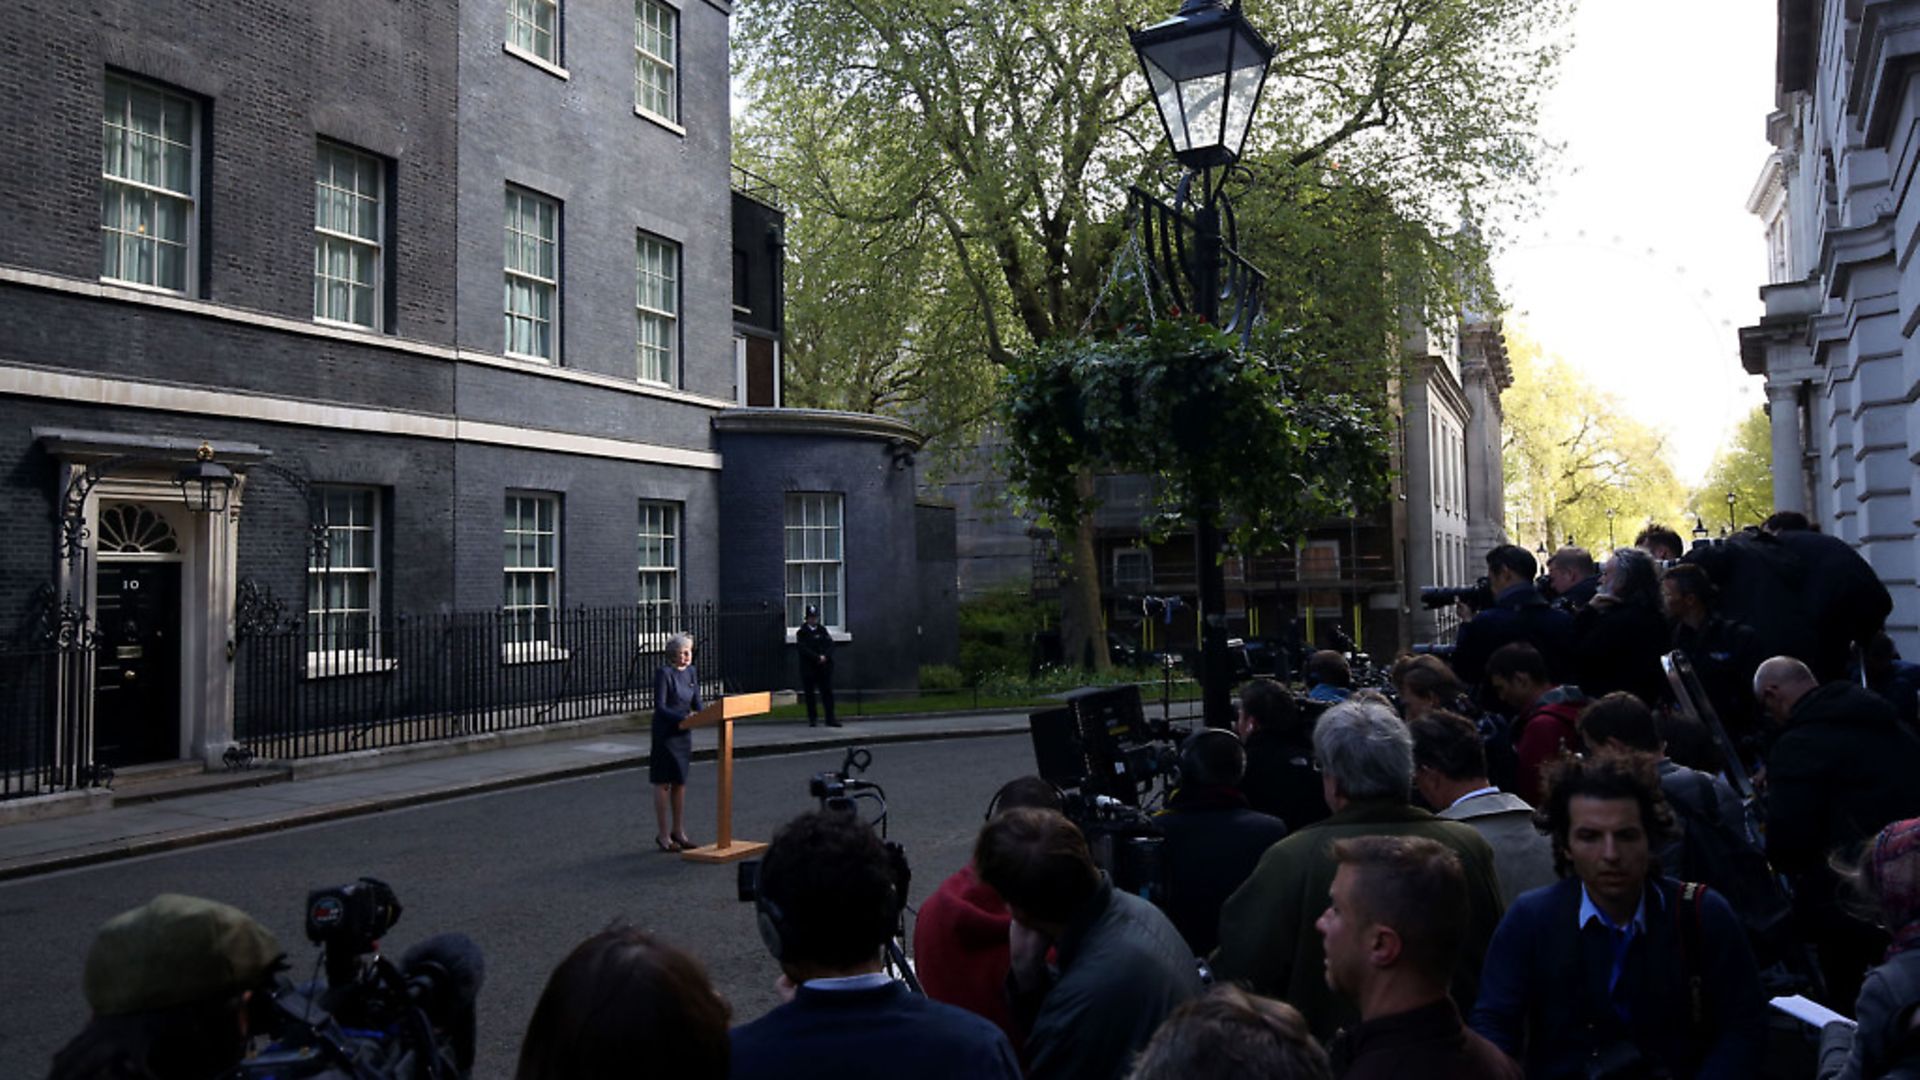 Prime Minister Theresa May announcing a snap general election on June 8. PICTURE: Philip Toscano/PA Wire - Credit: PA